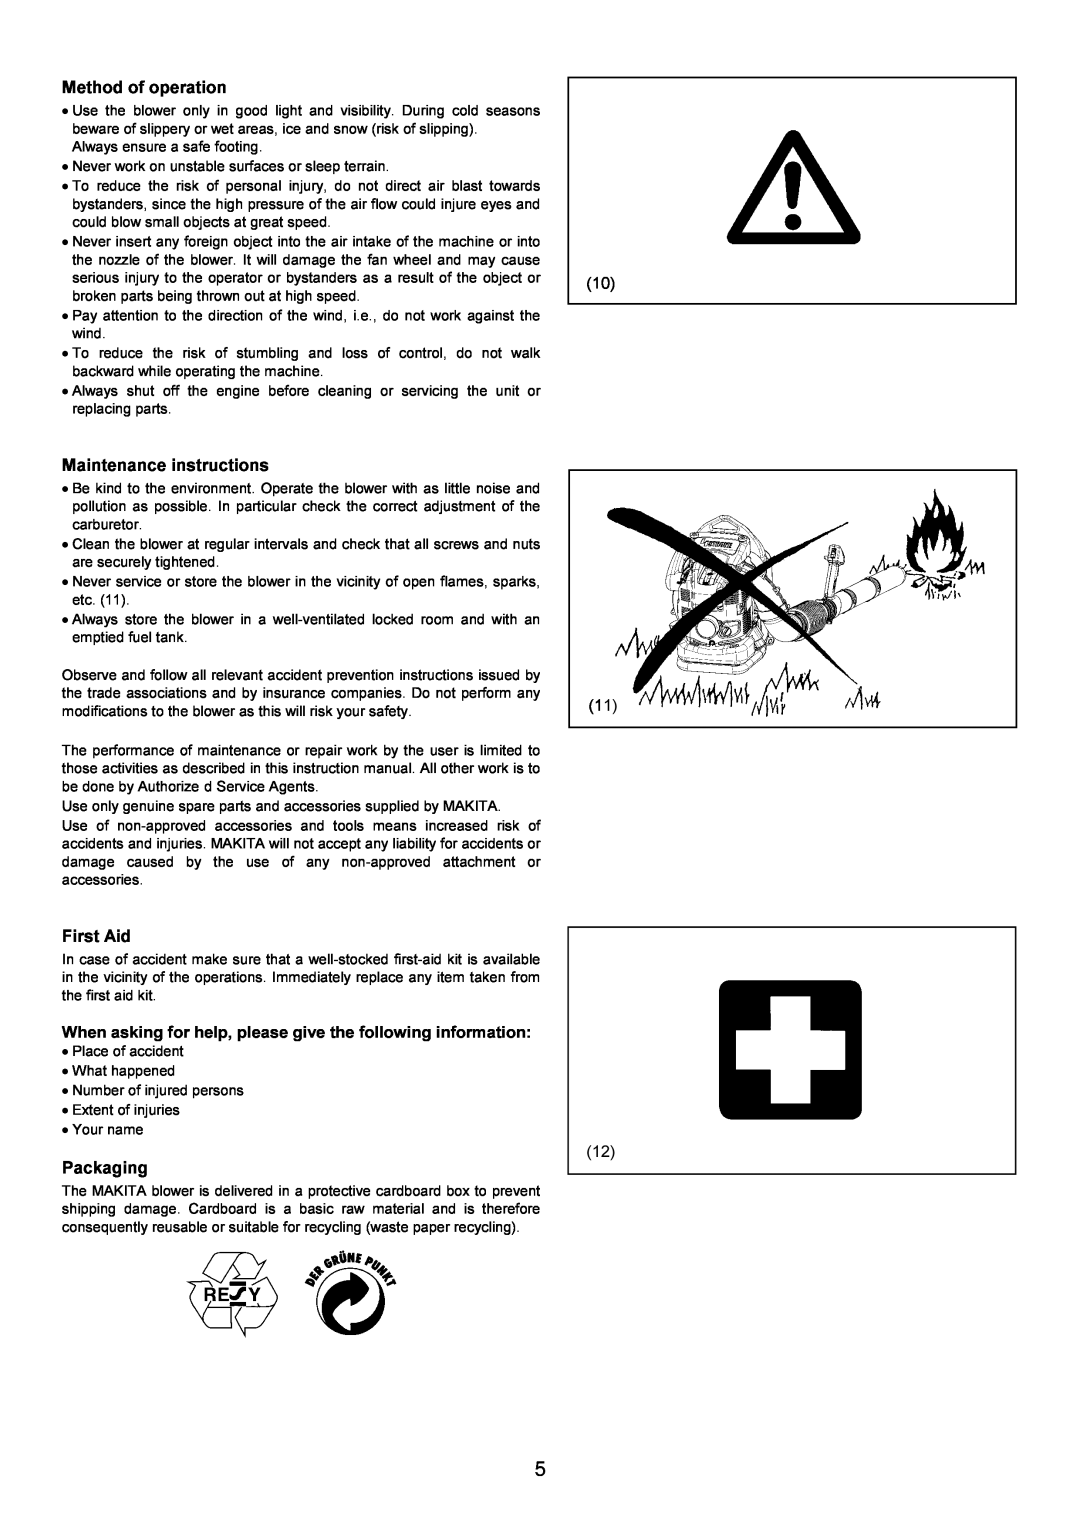 Makita BBX7600CA instruction manual Method of operation, Maintenance instructions, First Aid, Packaging 